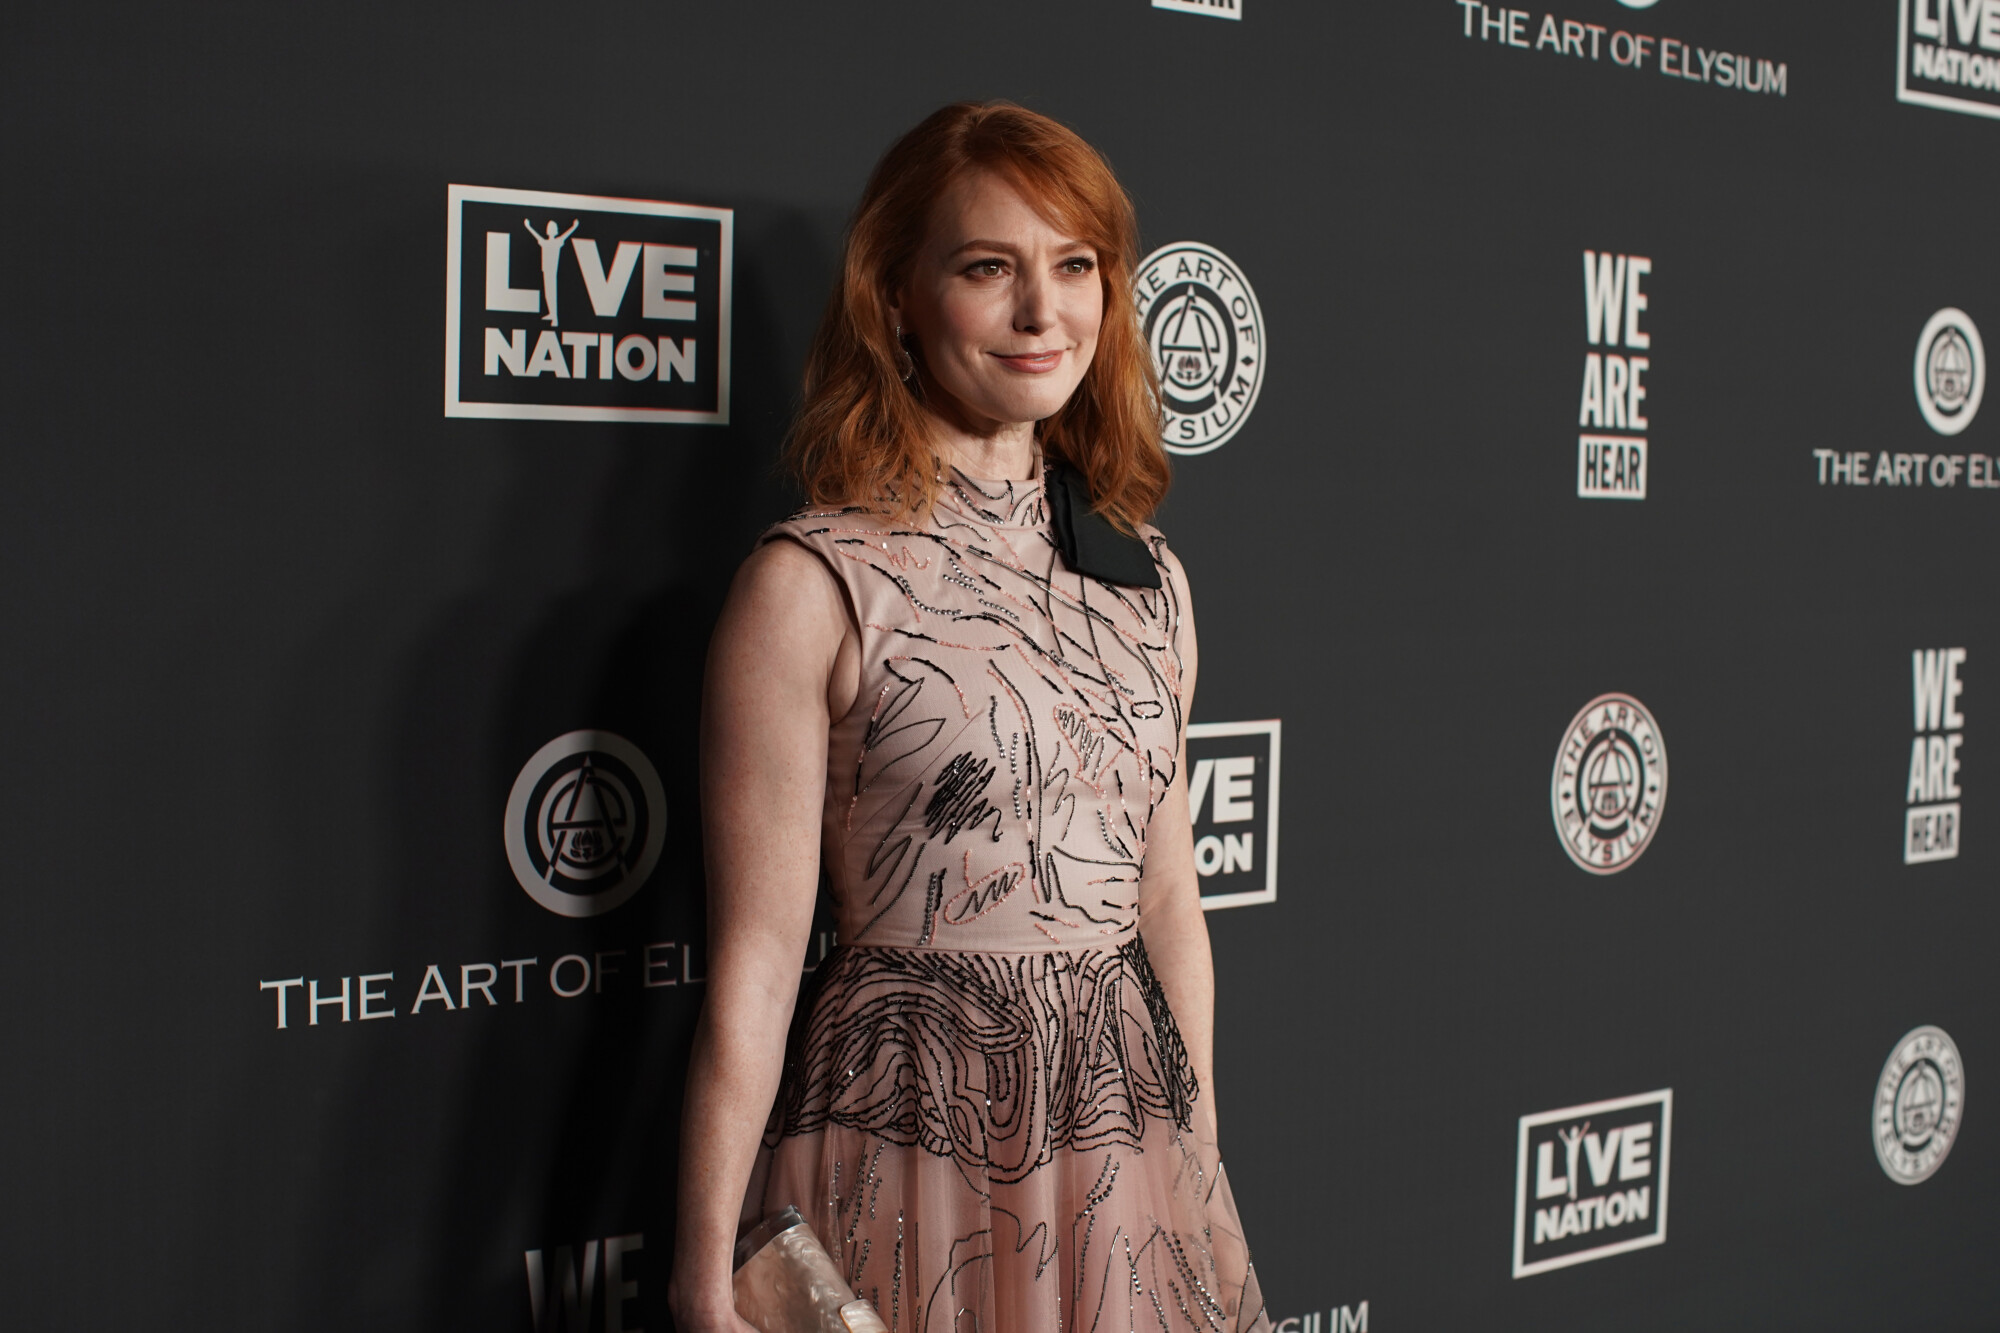 Parents of Actress Alicia Witt Found Dead in Their Home.